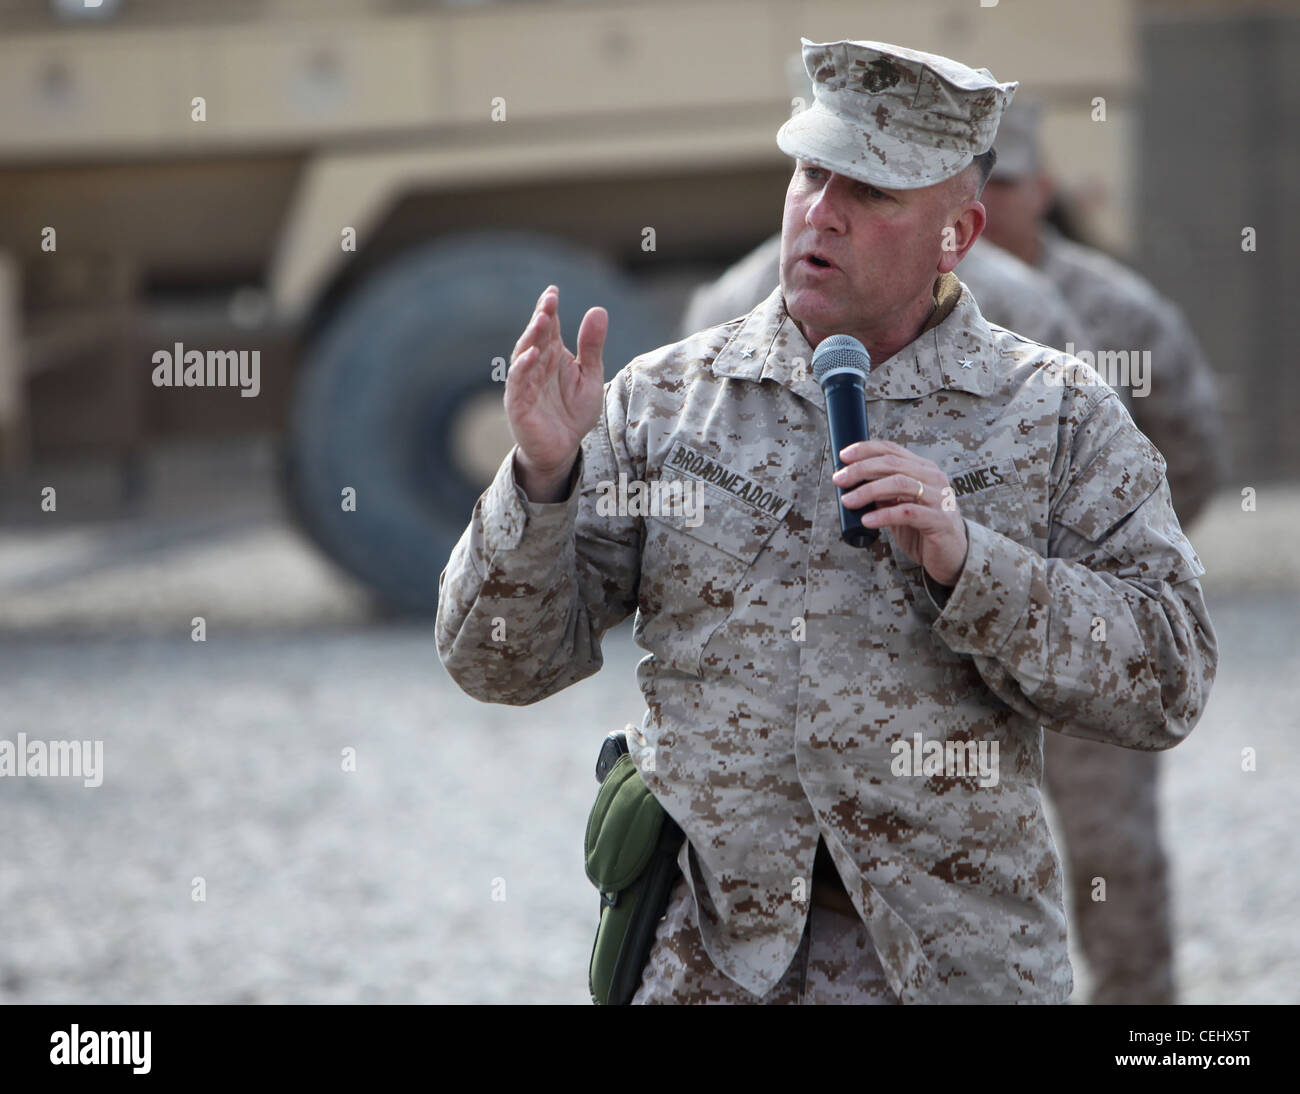 Brig. Gen. John J. Broadmeadow, commanding general of 1st Marine Logistics Group (Forward), addresses guests during a transfer of authority ceremony aboard Camp Leatherneck, Afghanistan, Feb. 15. For the next year, 1st MLG (FWD) will assume all logistical support responsibilities in southern Afghanistan. Stock Photo